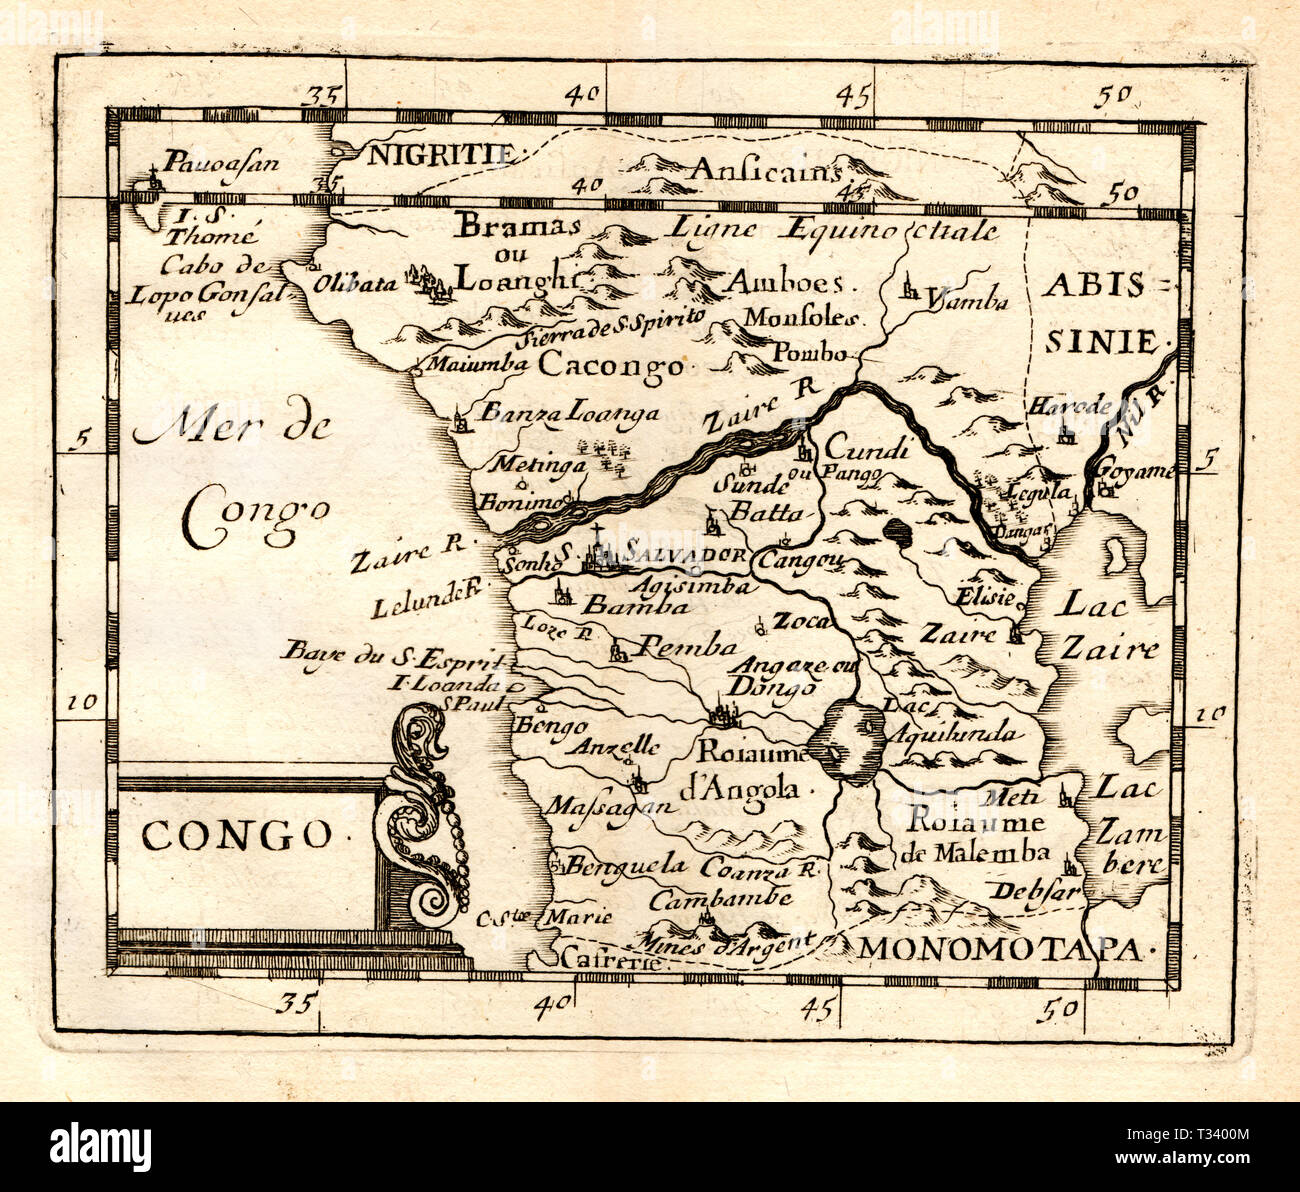 Antique Map of Africa showing the Congo by Pierre Duval, published in Paris, 1682 Stock Photo